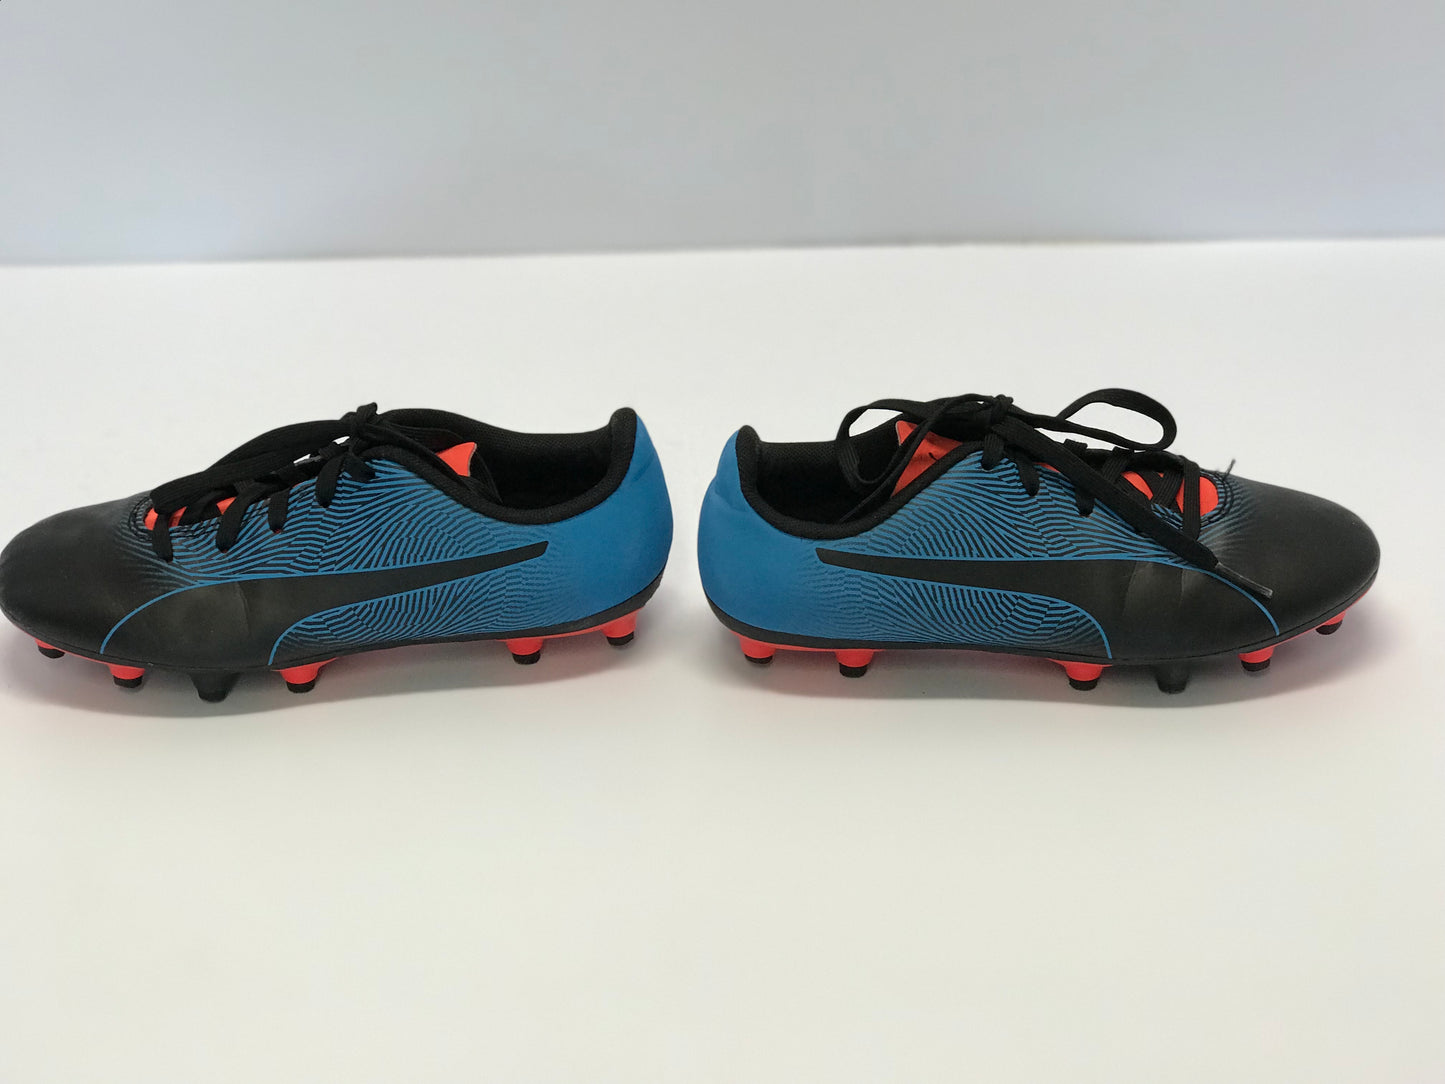 Soccer Shoes Cleats Child Size 3 Puma Blue and Orange Like New